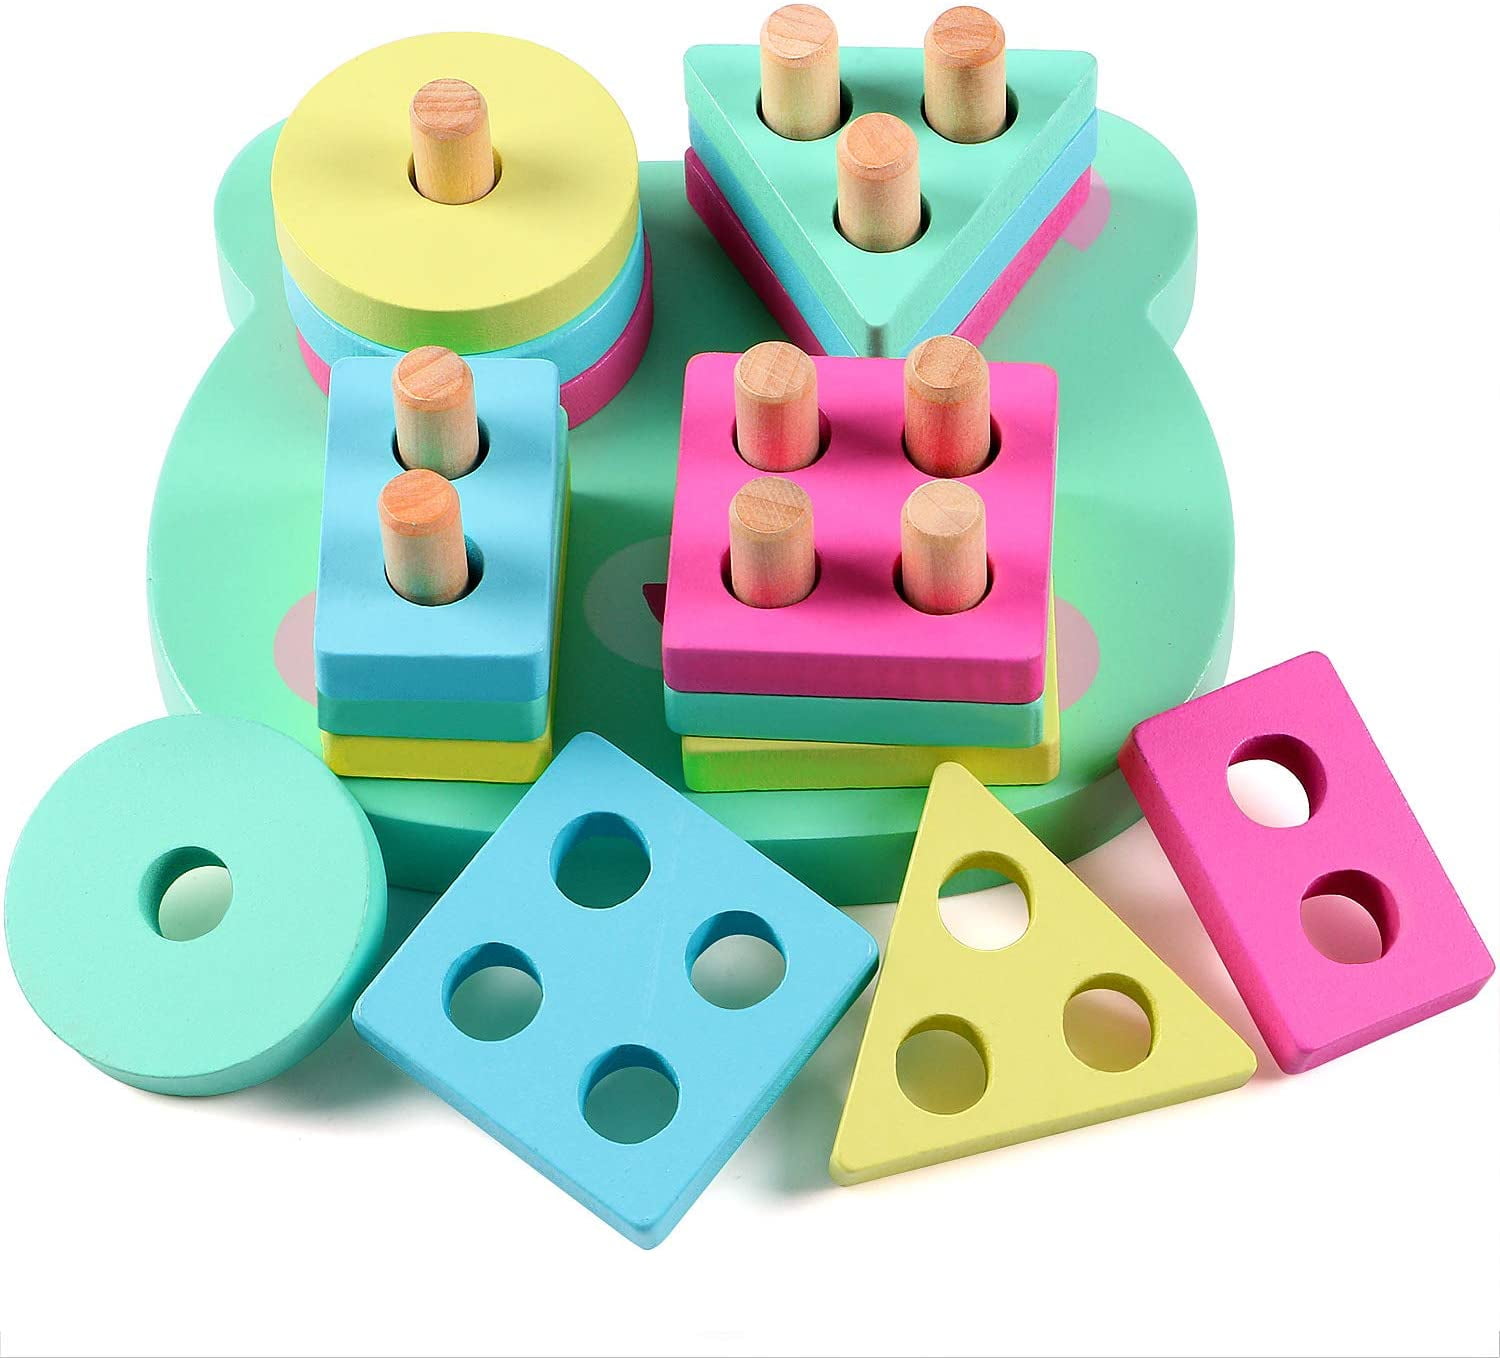 Wooden Educational Stacking Blocks Toys Geometry Shape Sorting Puzzles Board Q 